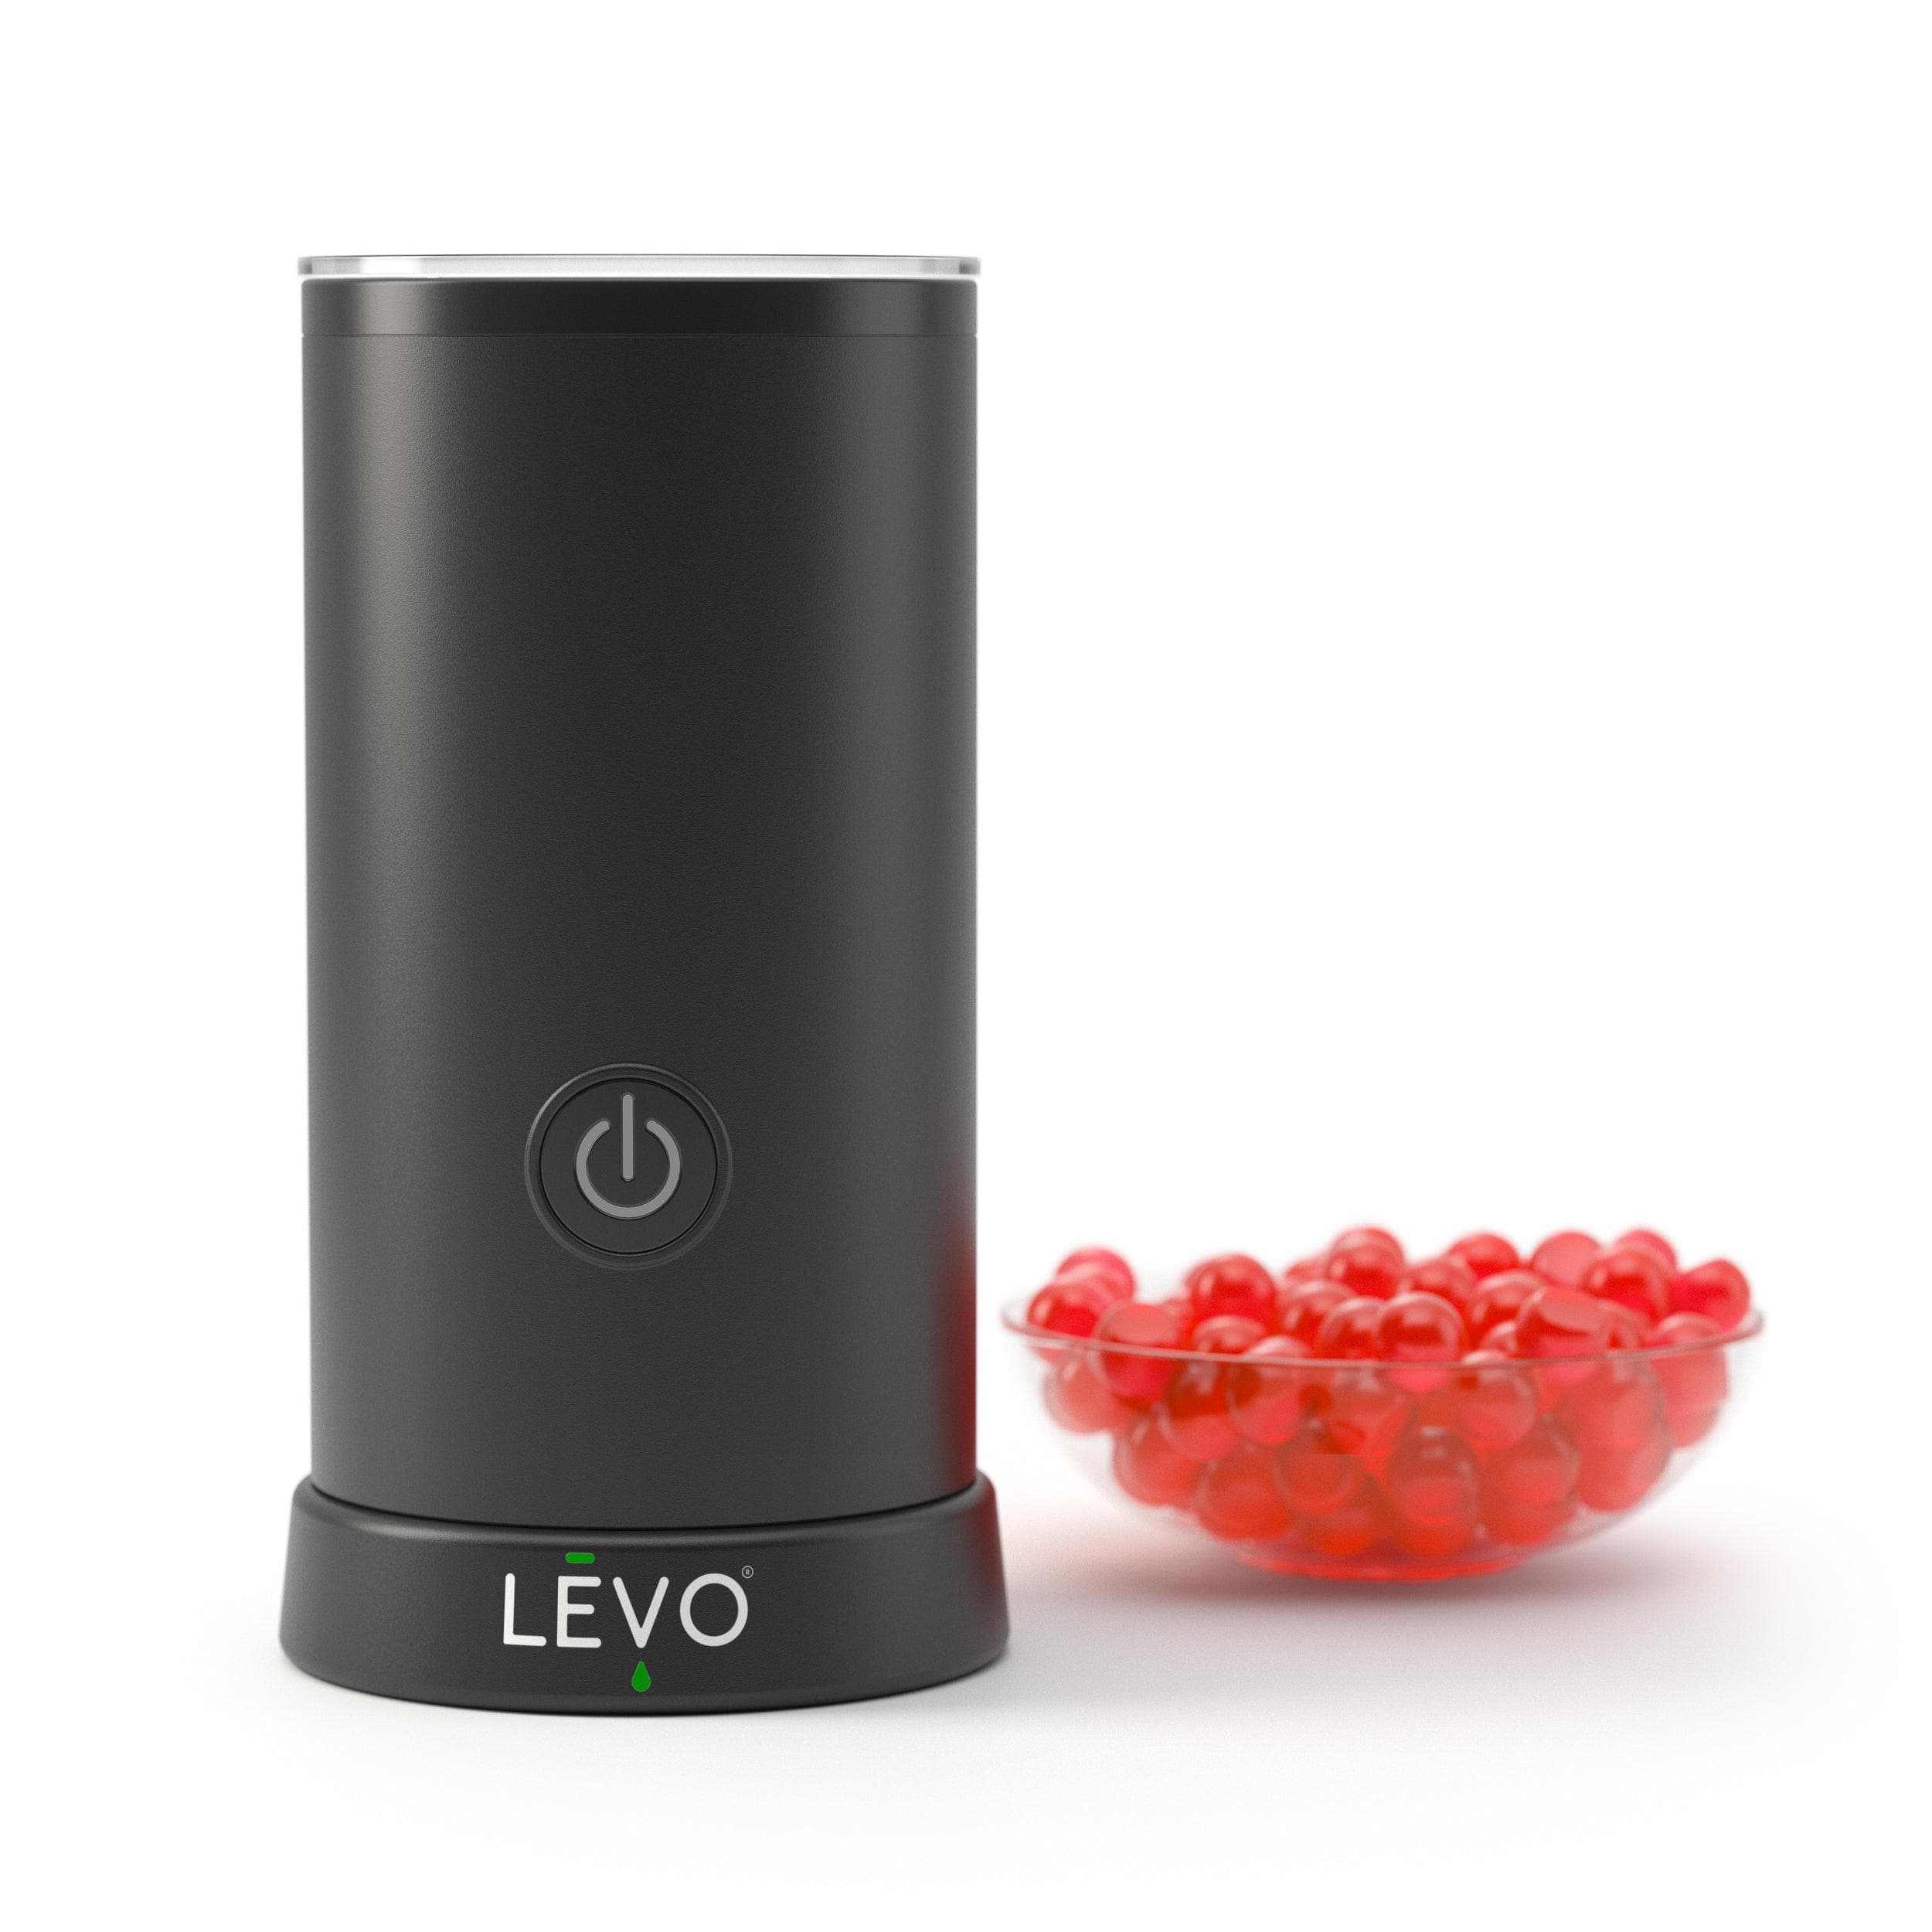 Gummy Edibles Making Kit with LEVO Gummy Candy Mixer. Experience the joy of crafting delicious gummies at home with the Gummy Edibles Making Kit and Gummy Candy Mixer.